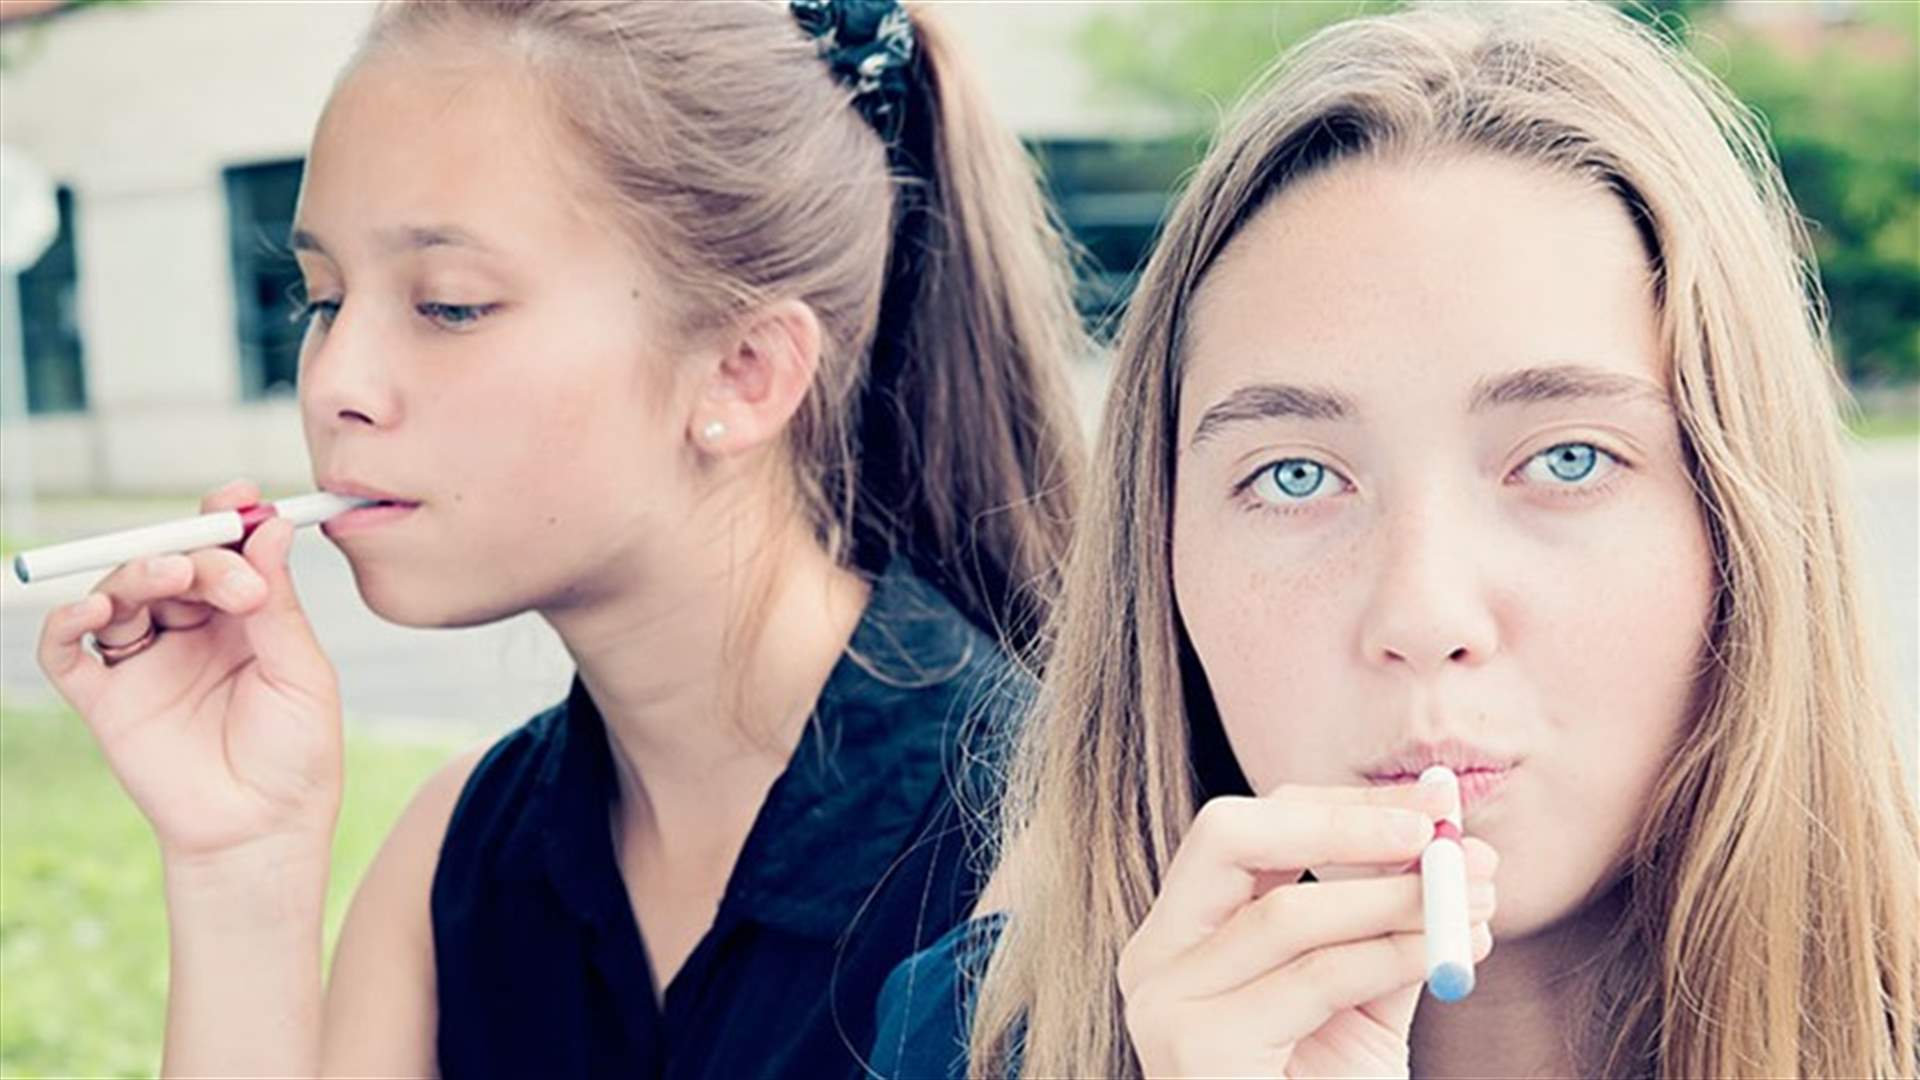 Teenagers Use E-cigarettes Because They Are Cool